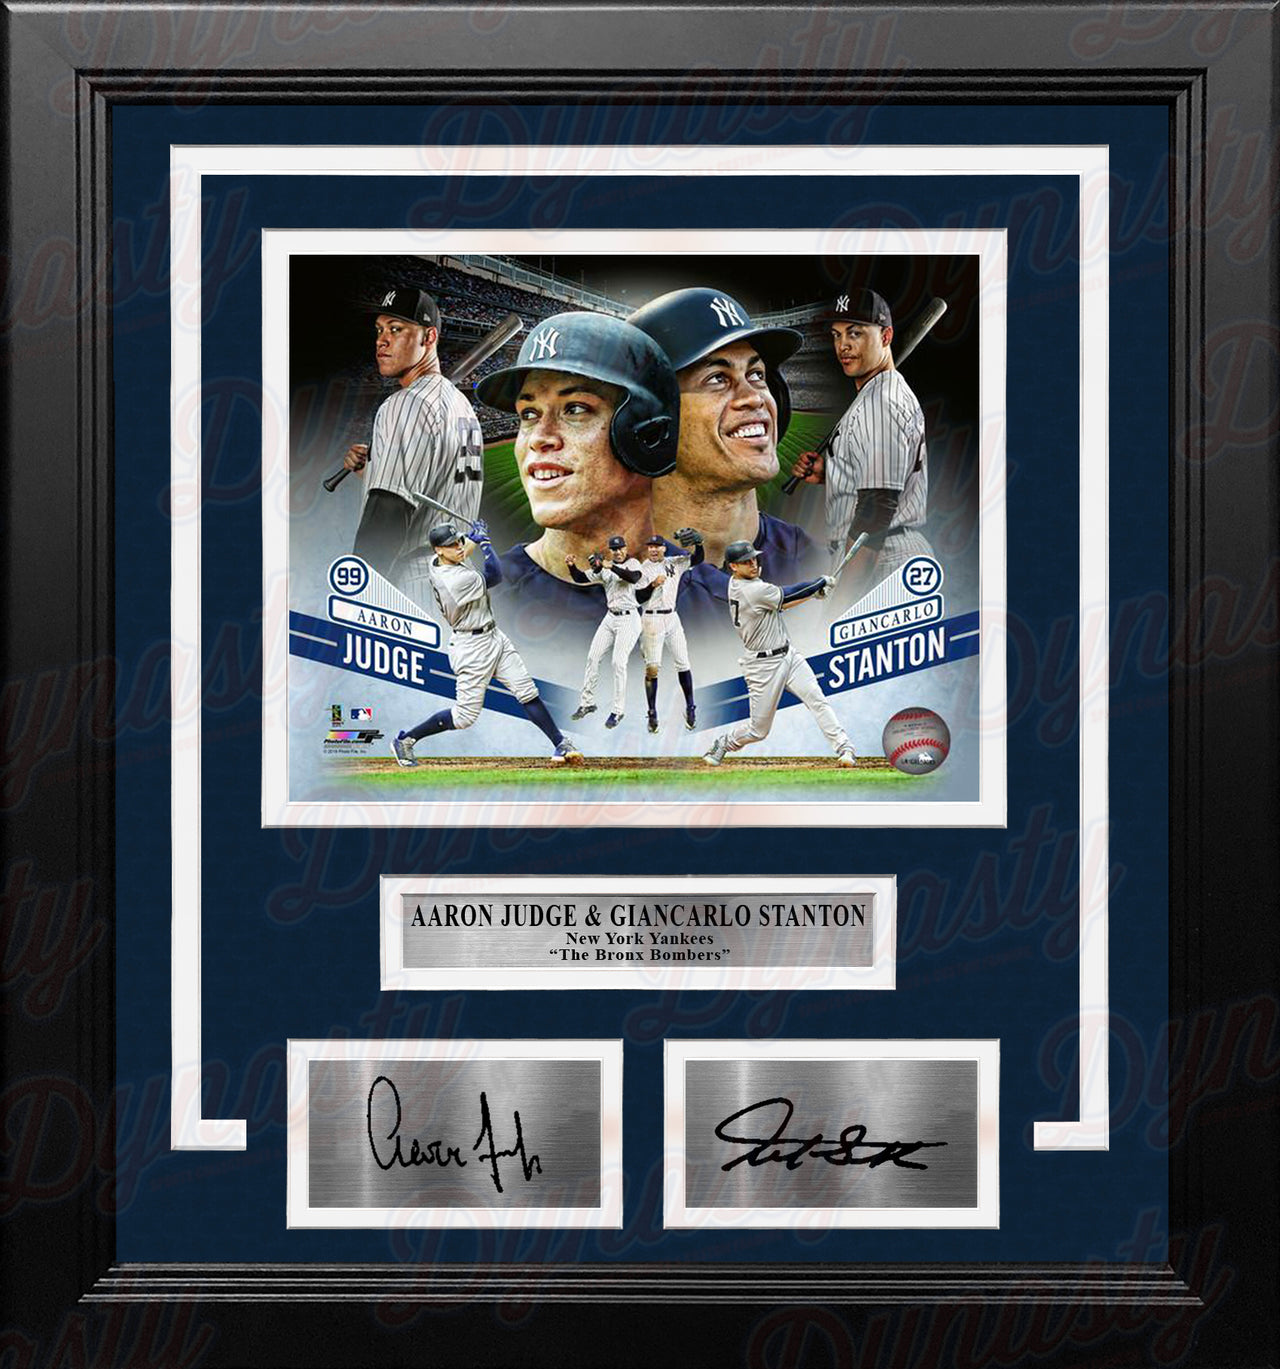 Aaron Judge & Giancarlo Stanton New York Yankees Collage 8x10 Framed Photo with Engraved Autographs - Dynasty Sports & Framing 